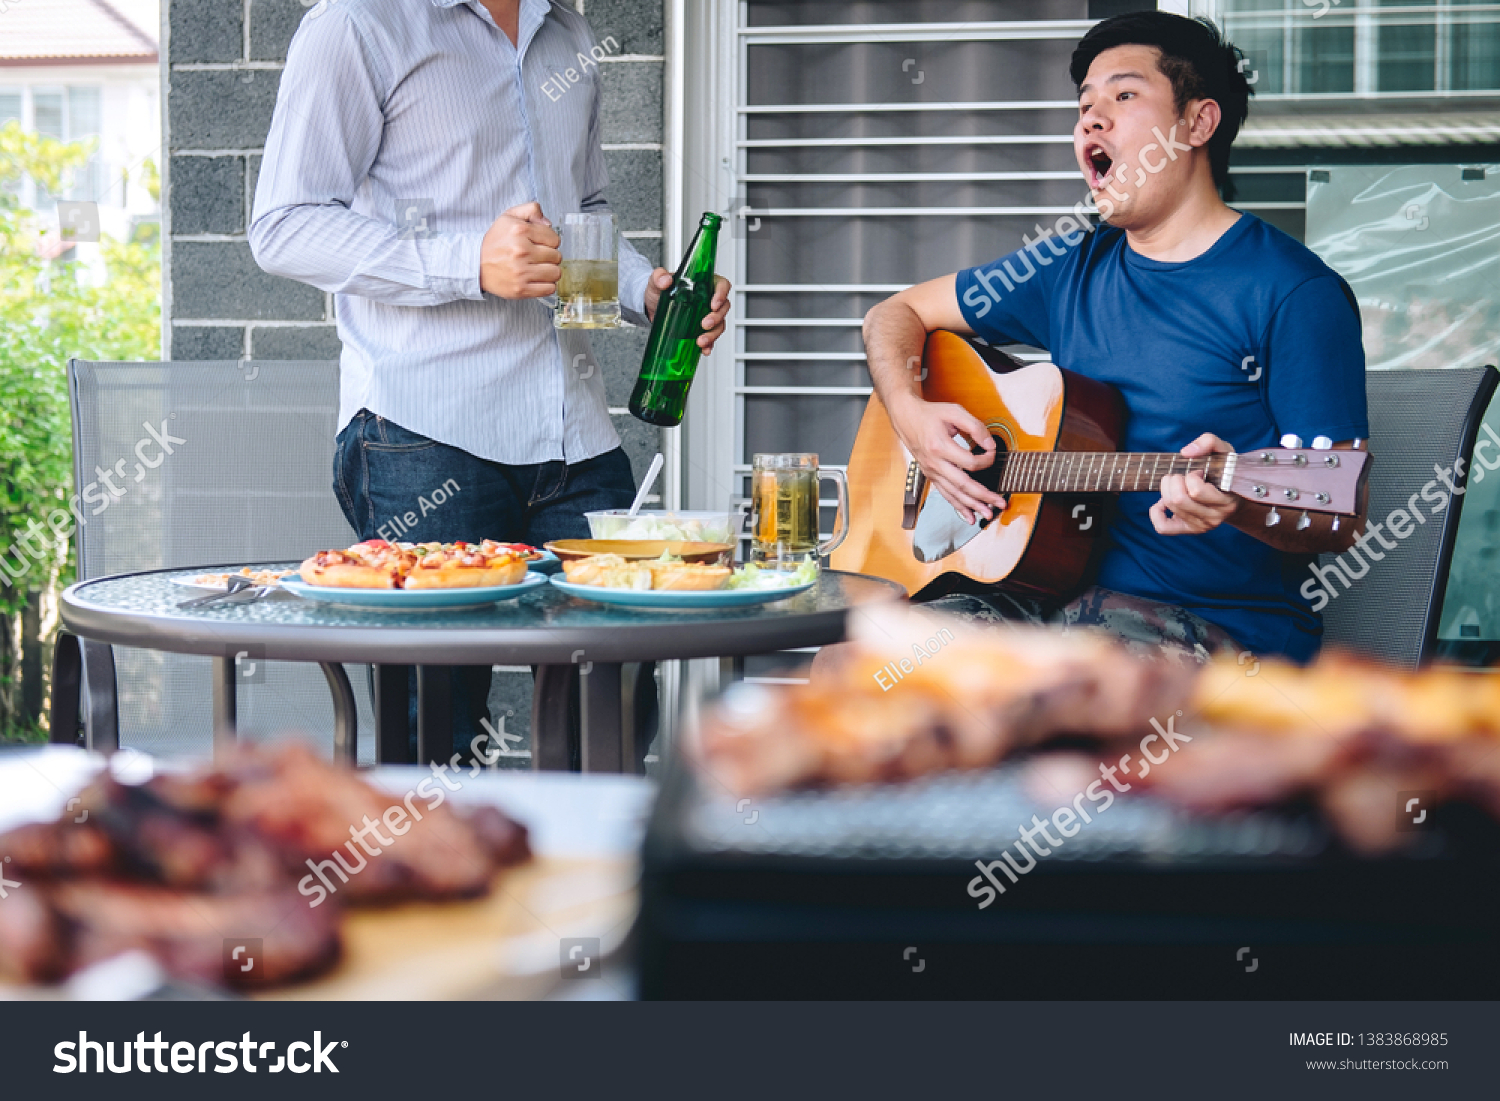 Group of friends Two young man enjoying grilled meat and play guitar with raise a glass of beer to celebrate the holiday festival happy drinking beer outdoors and enjoyment at home. #1383868985